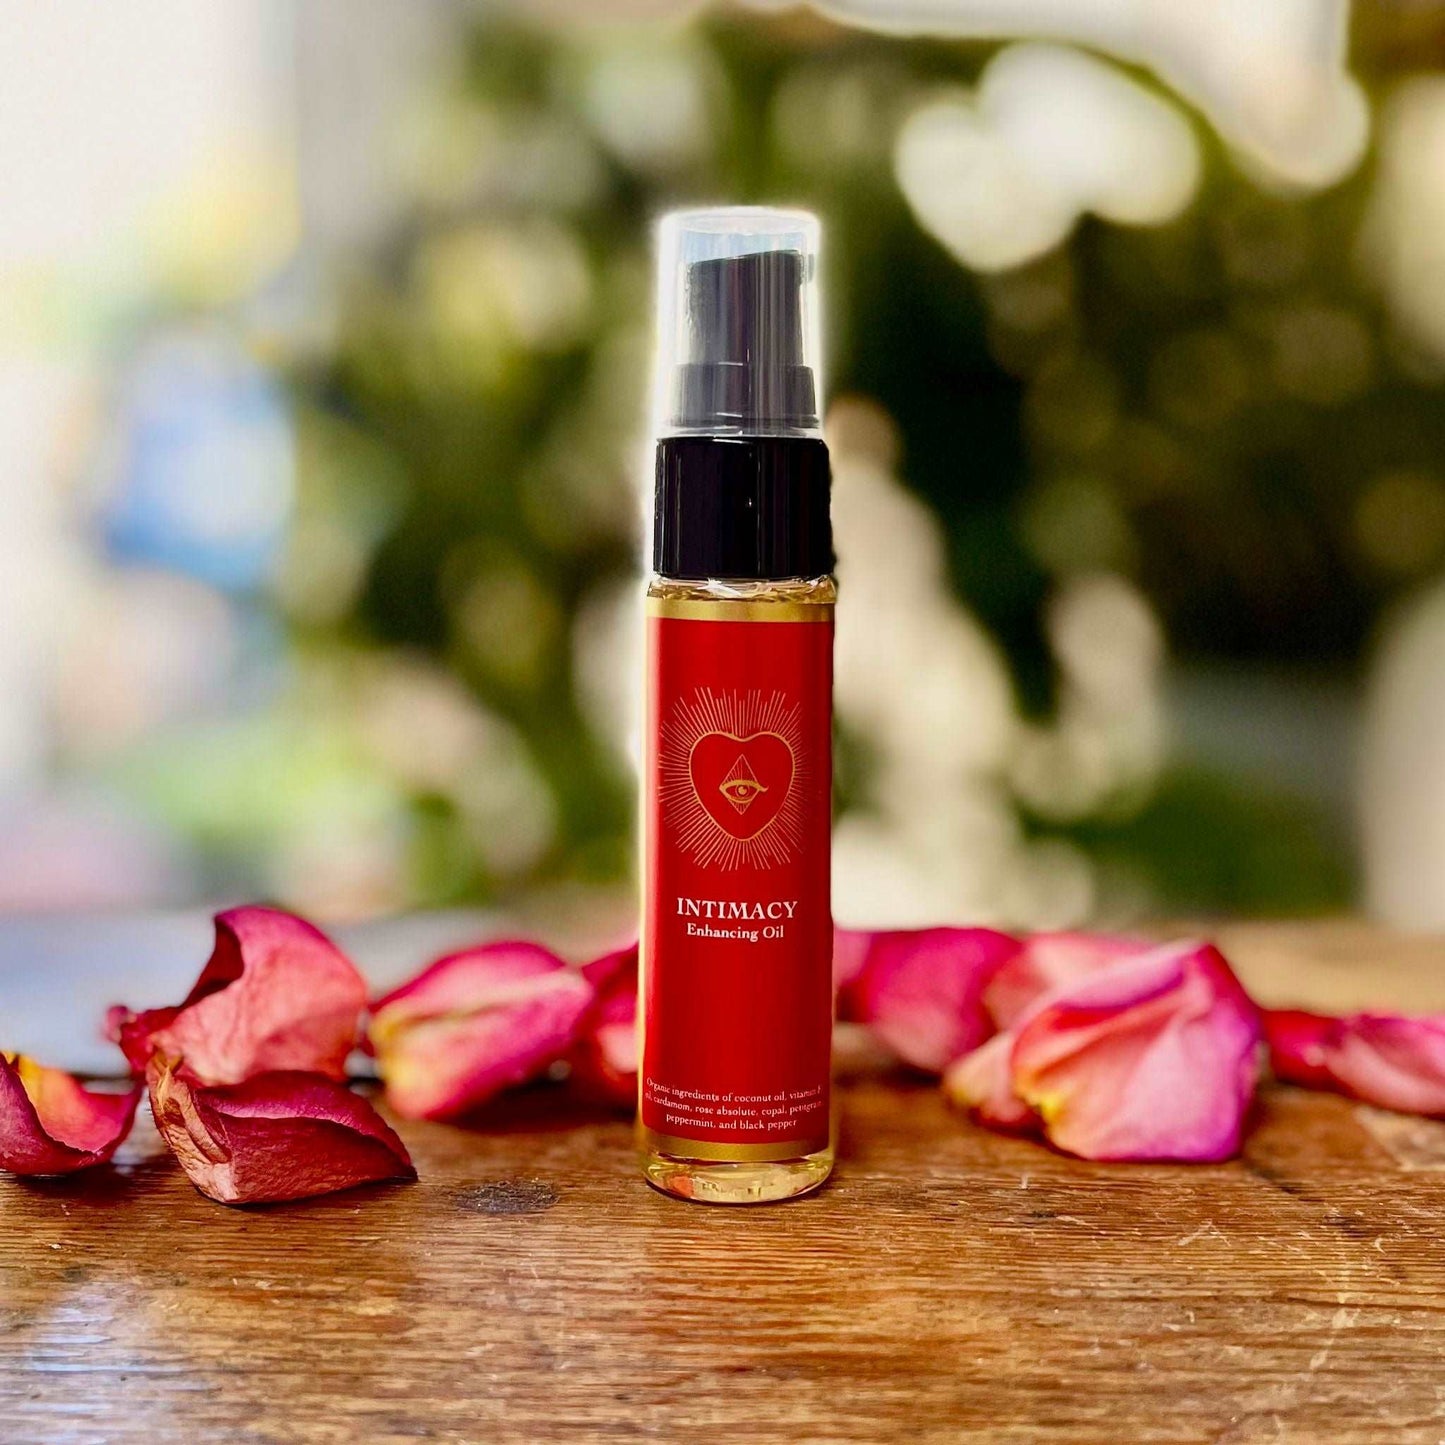 1 oz Intimacy Enhancing Oil with Organic Coconut Oil, Vitamin E Oil, and Sensual Organic Essential Oils of Copal, Petitgrain, Cardamom, Rose Geranium, Rose Absolute, Black Pepper, and Peppermint for Deepened Connection and Sensual Delight